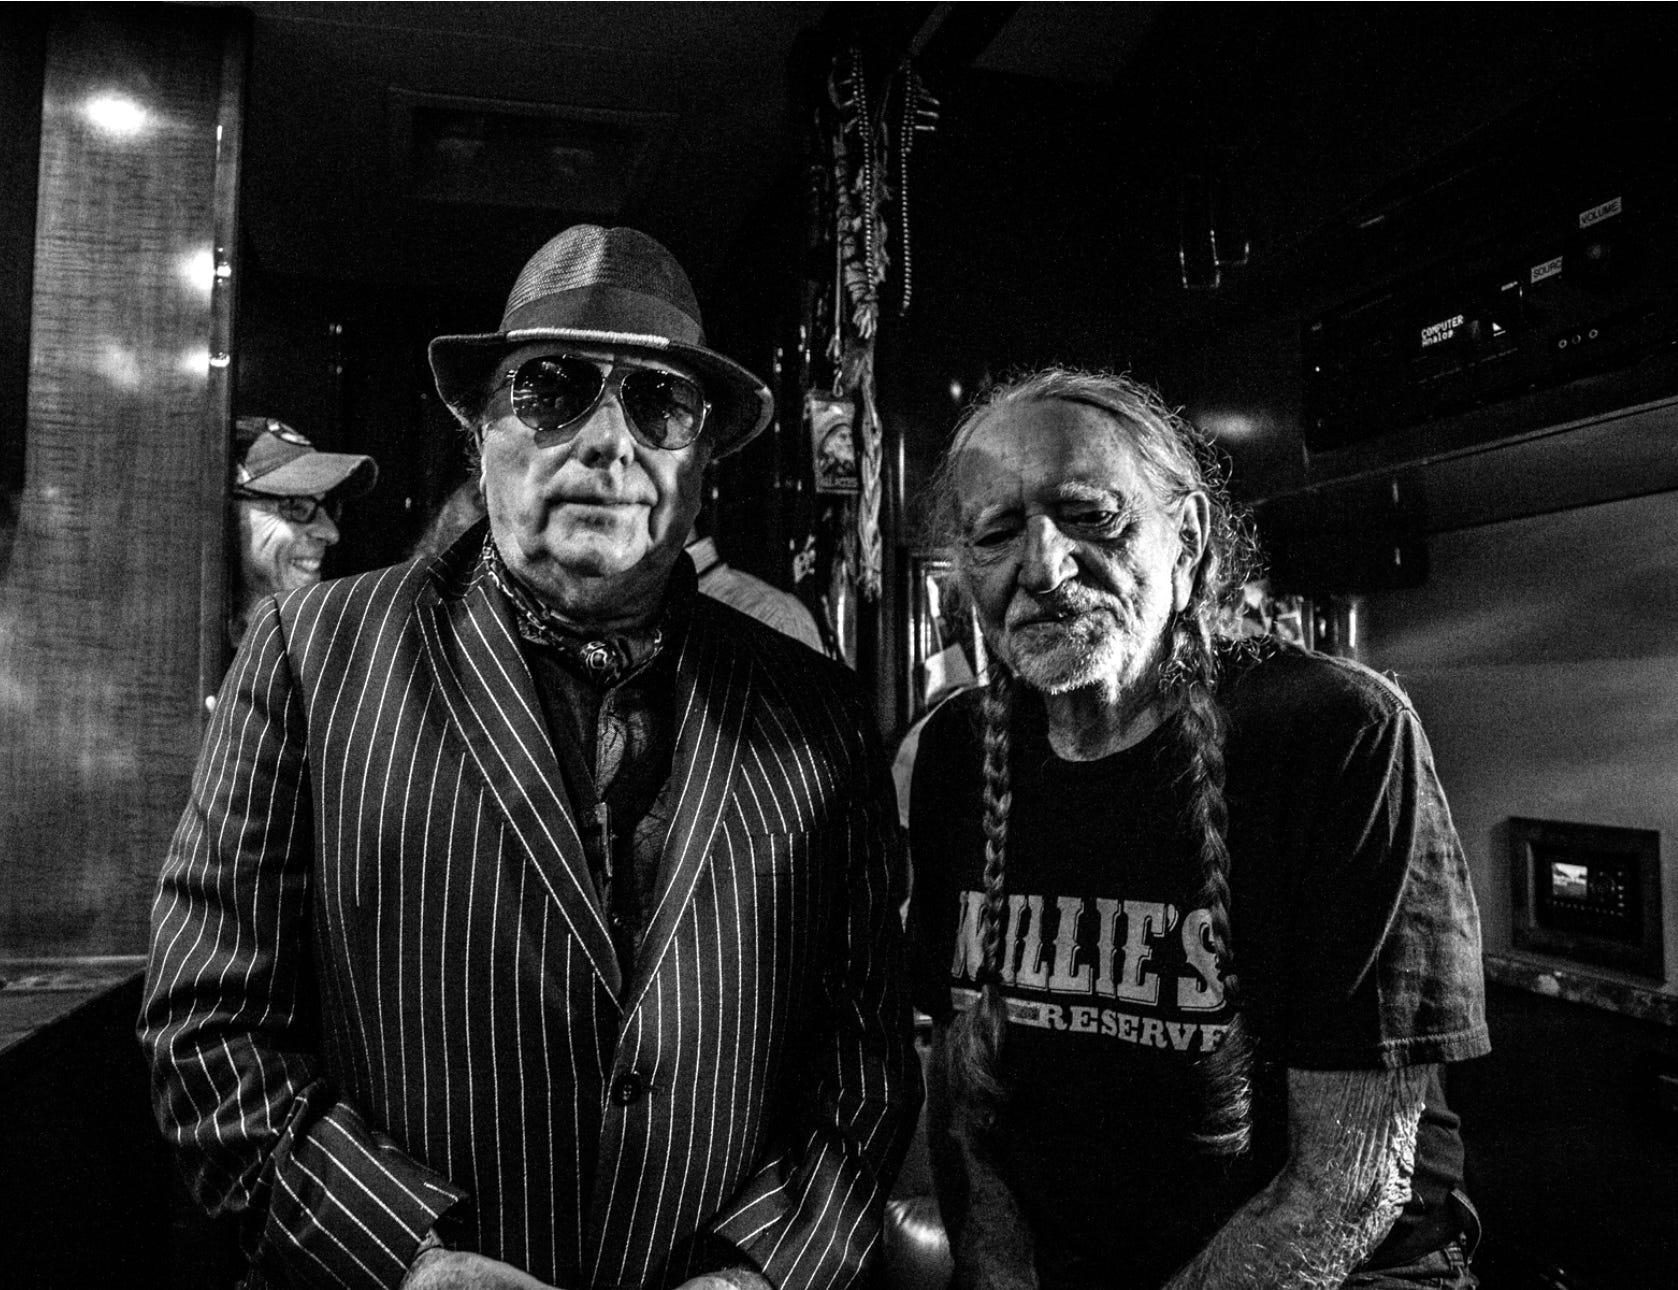 Van Morrison & Willie Nelson: Lessons in keepin' on